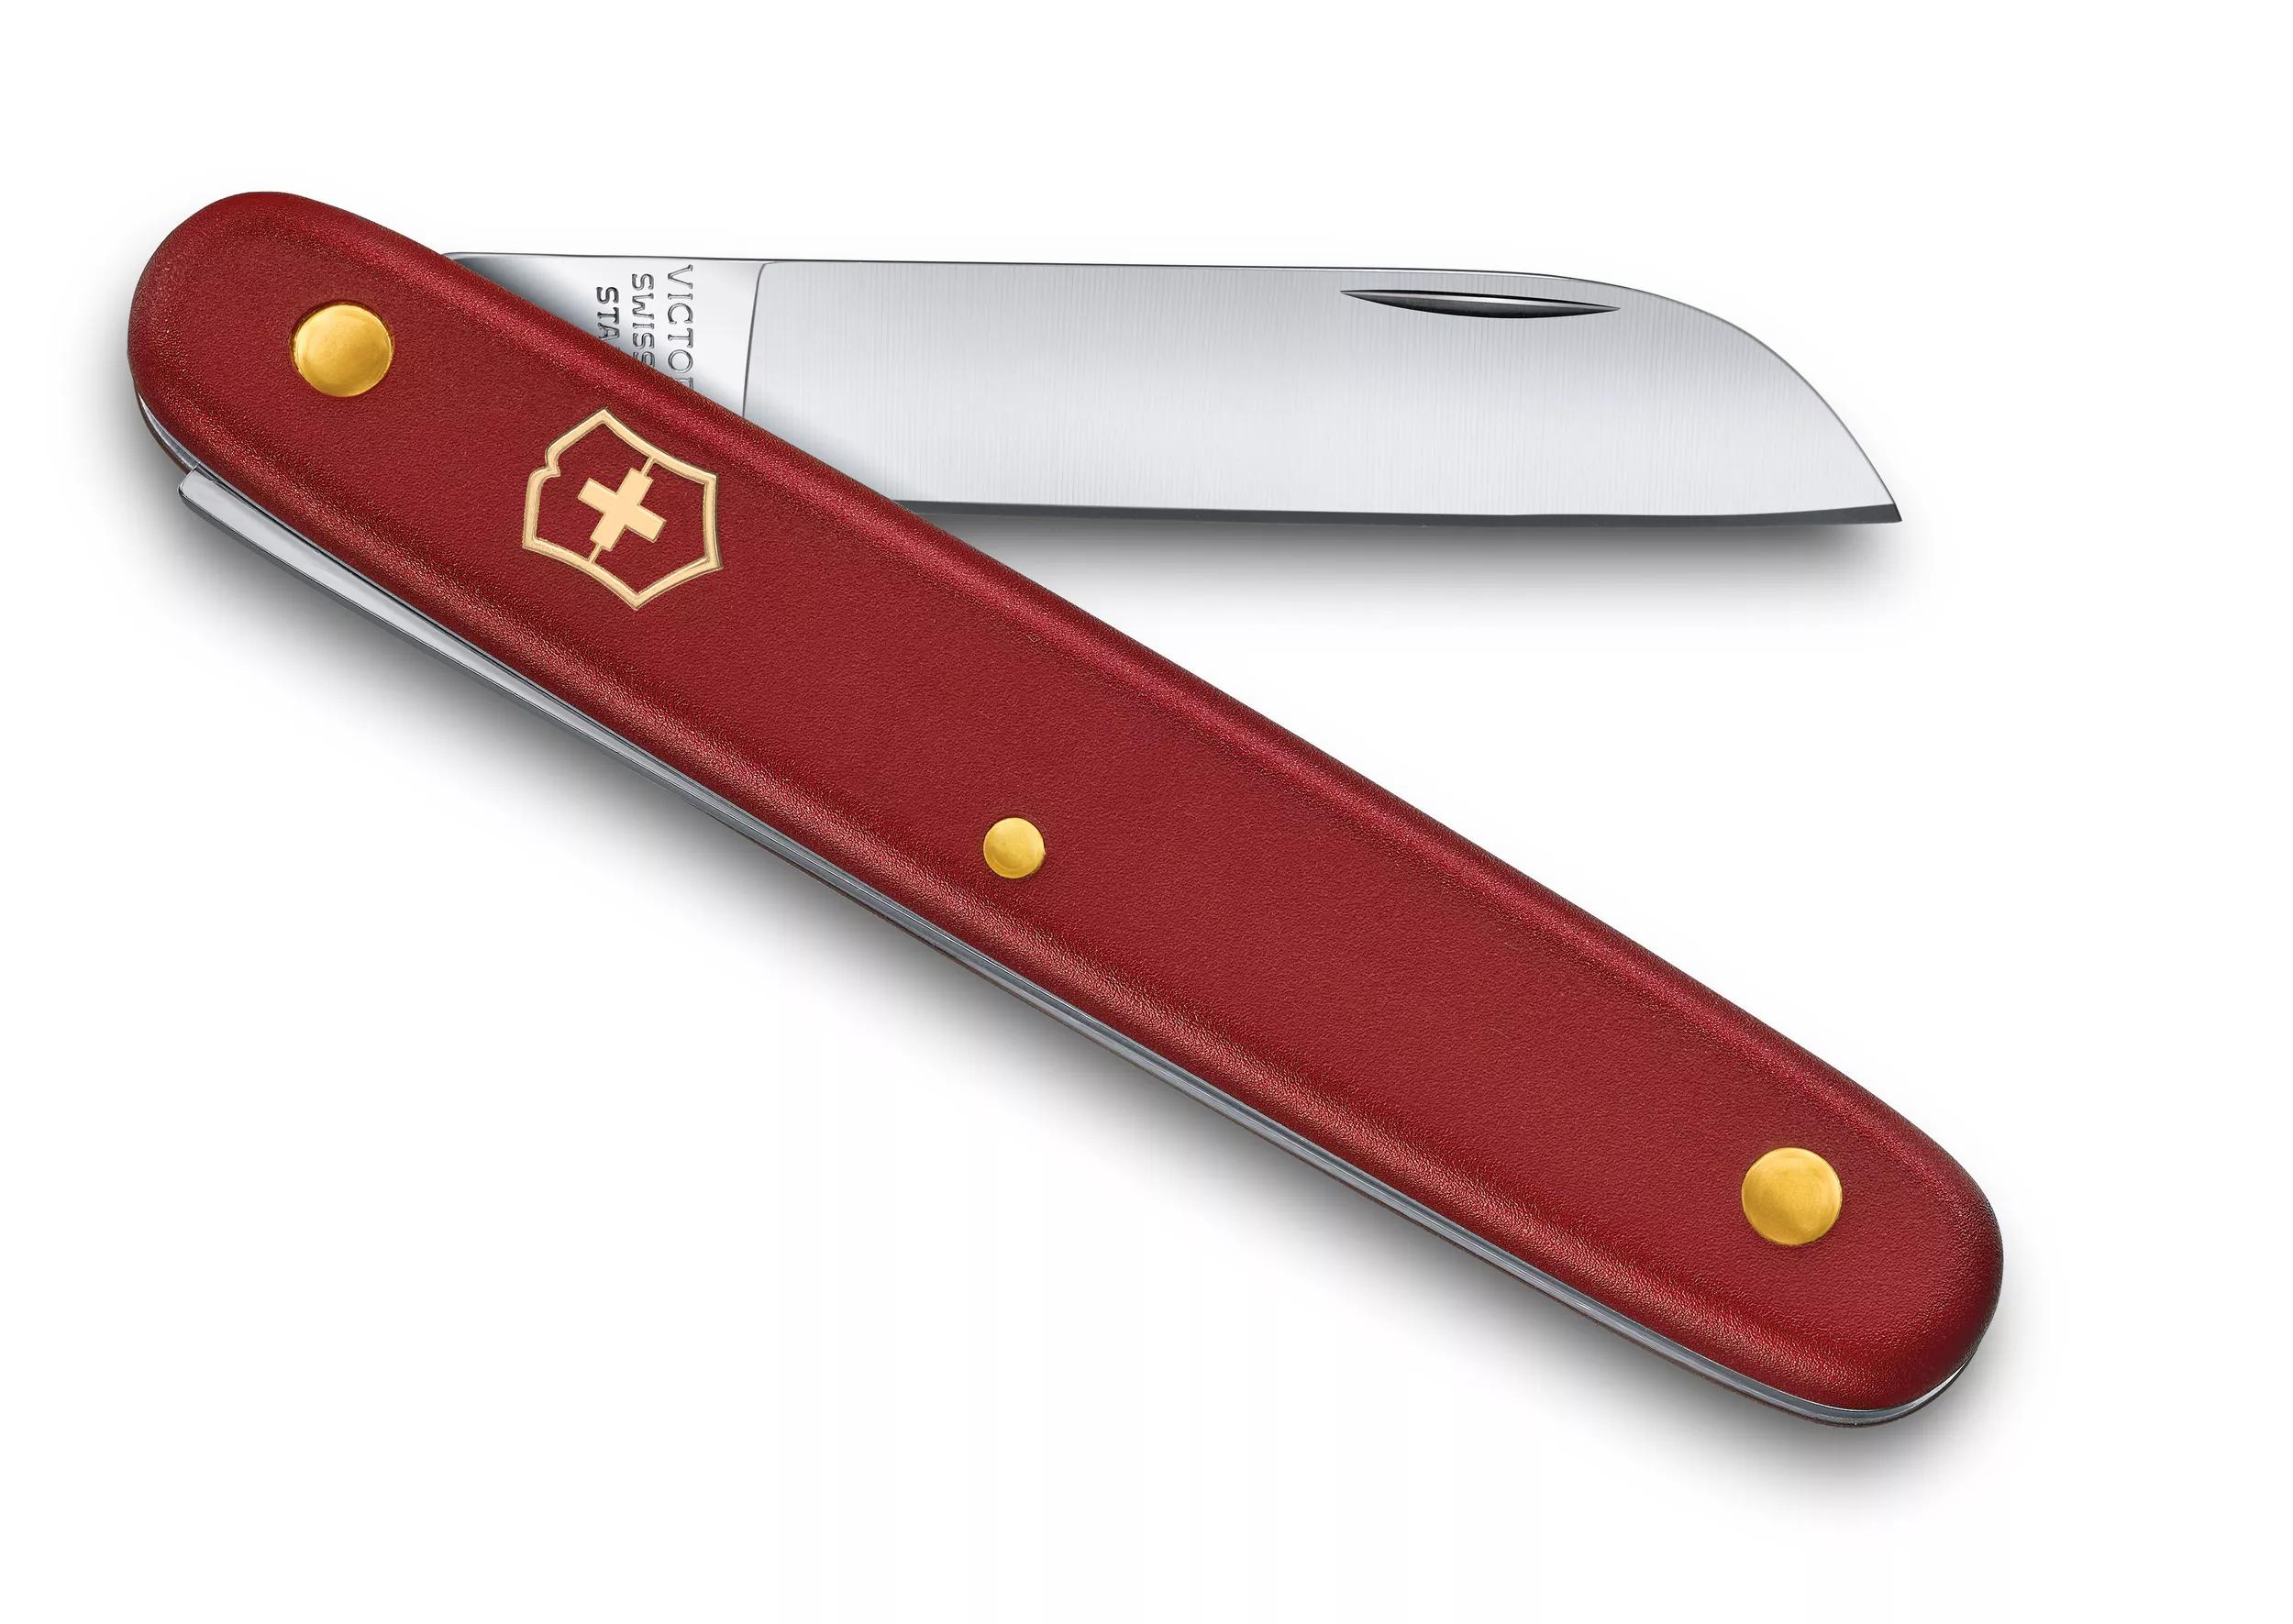 Victorinox Floral Knife Left-handed in red - 3.9450.B1